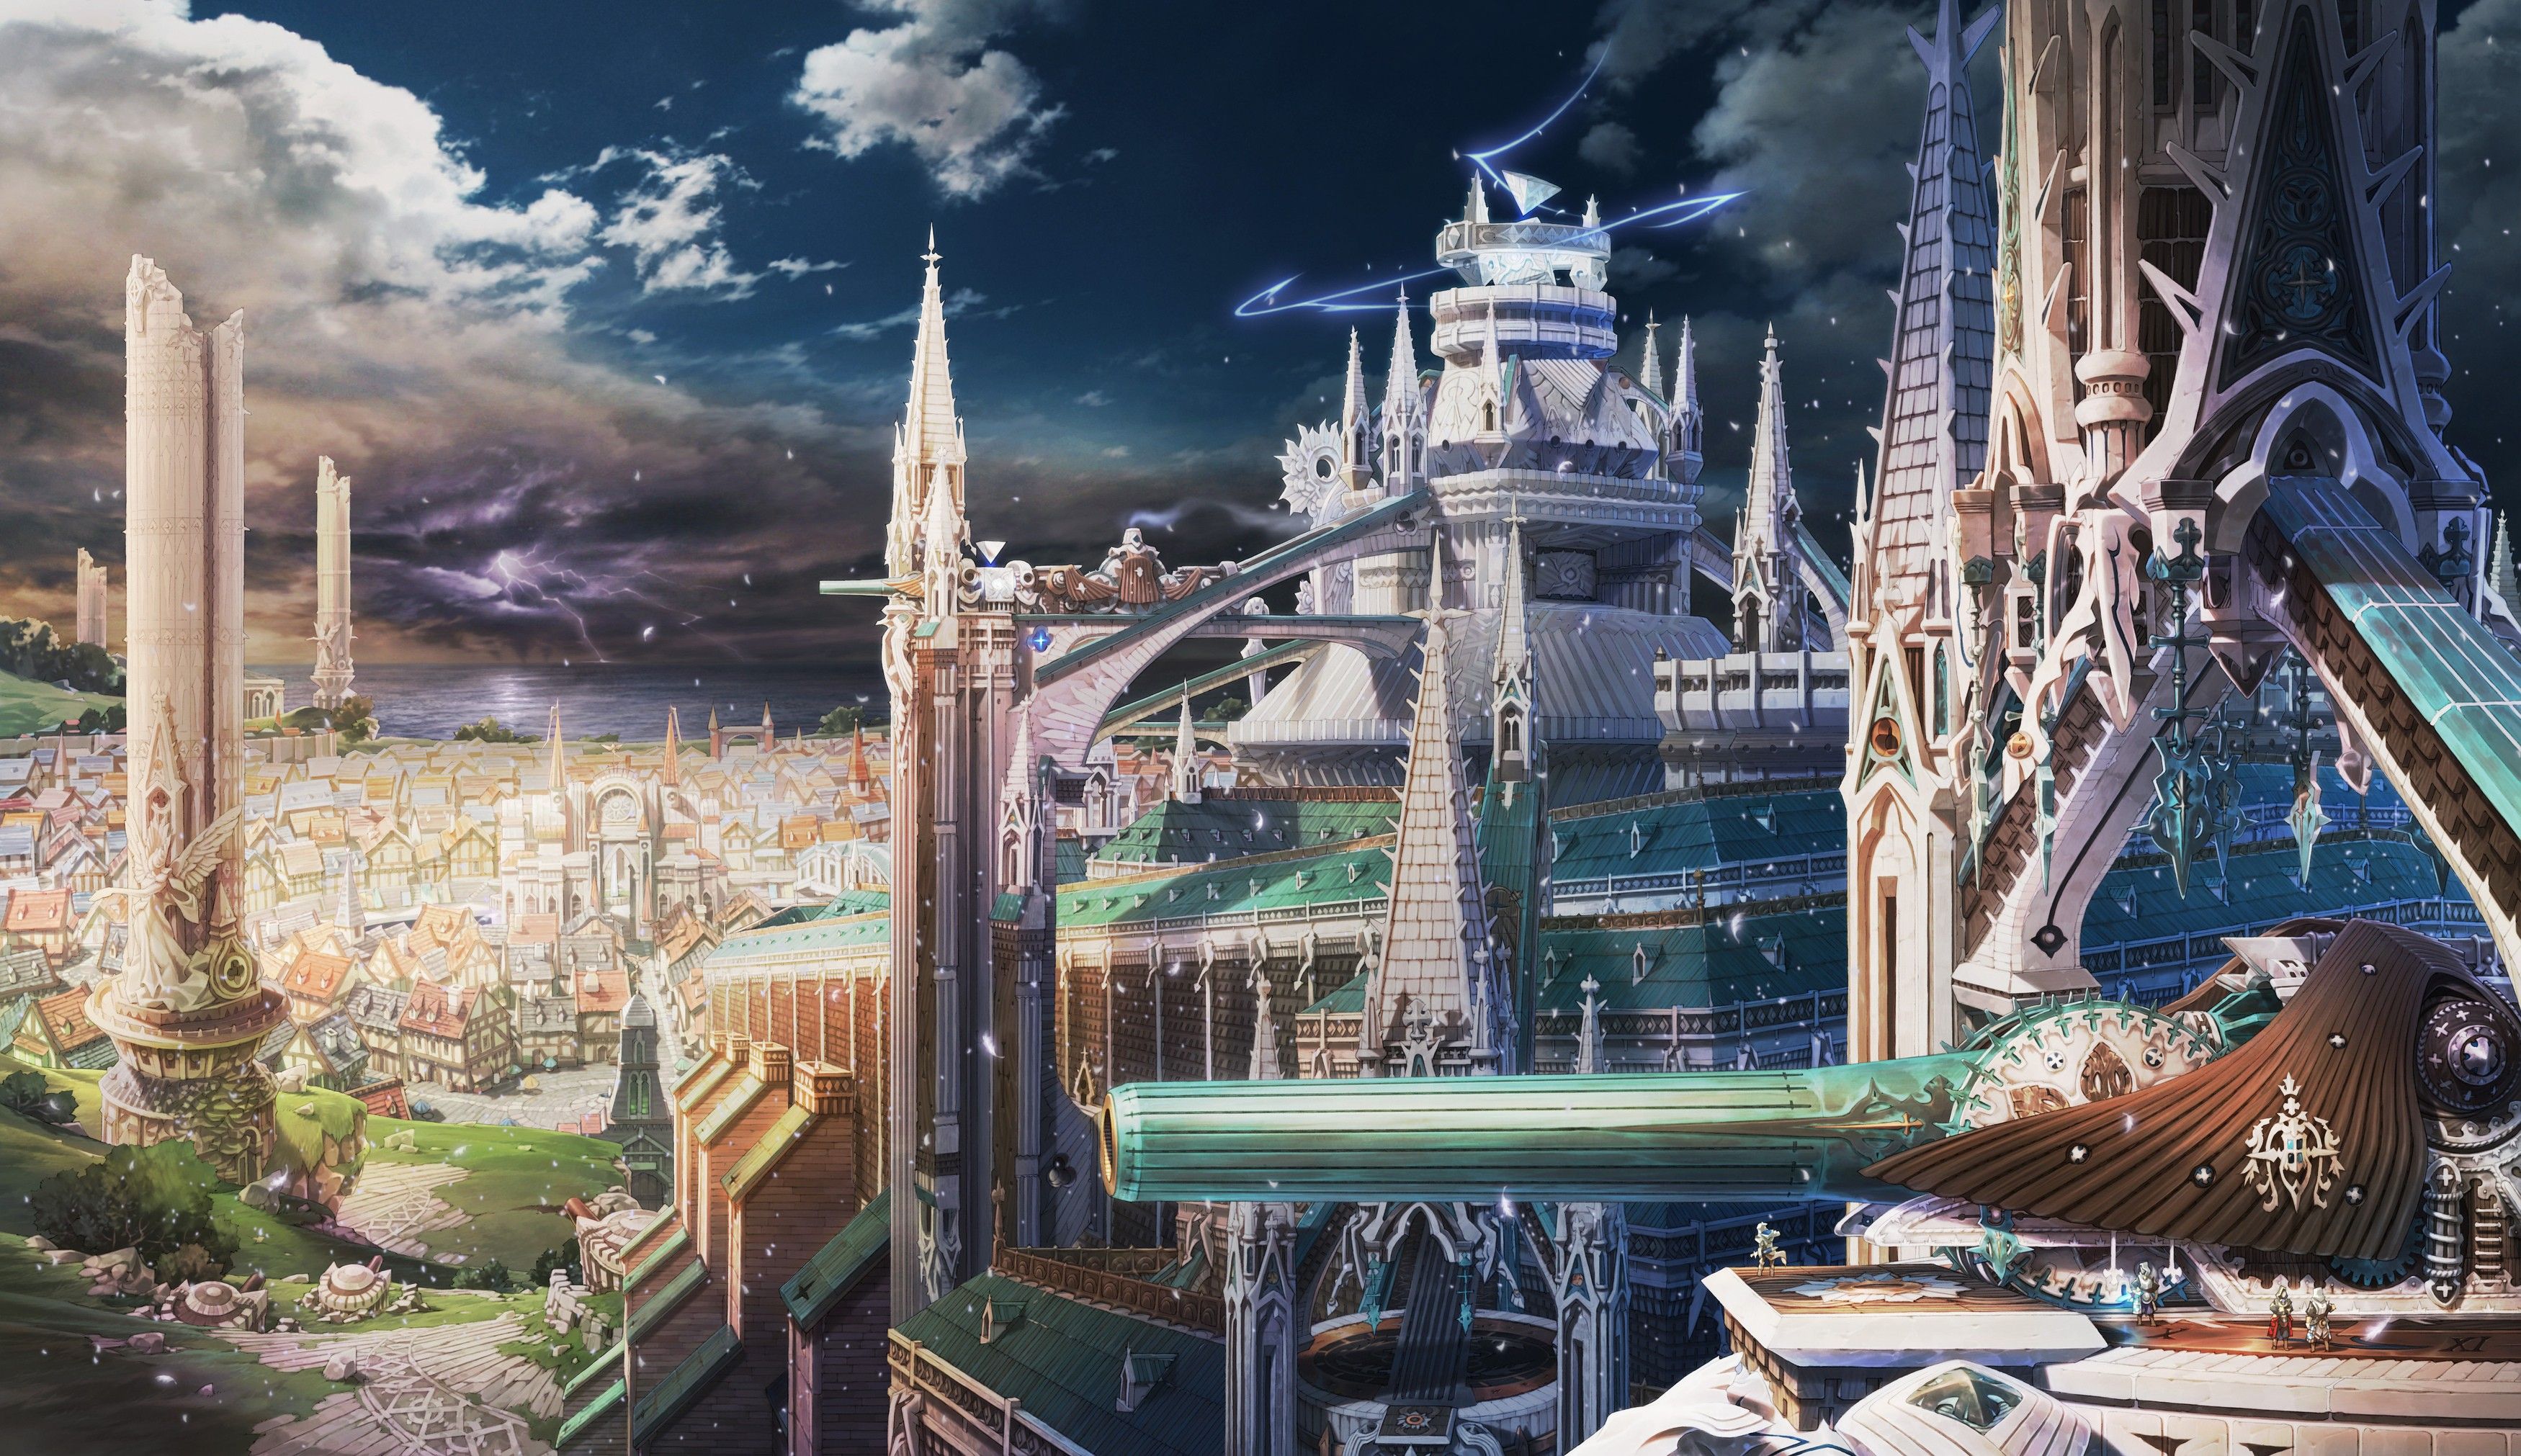 Clouds castles cityscapes fantasy art anime cities wallpaperx2022